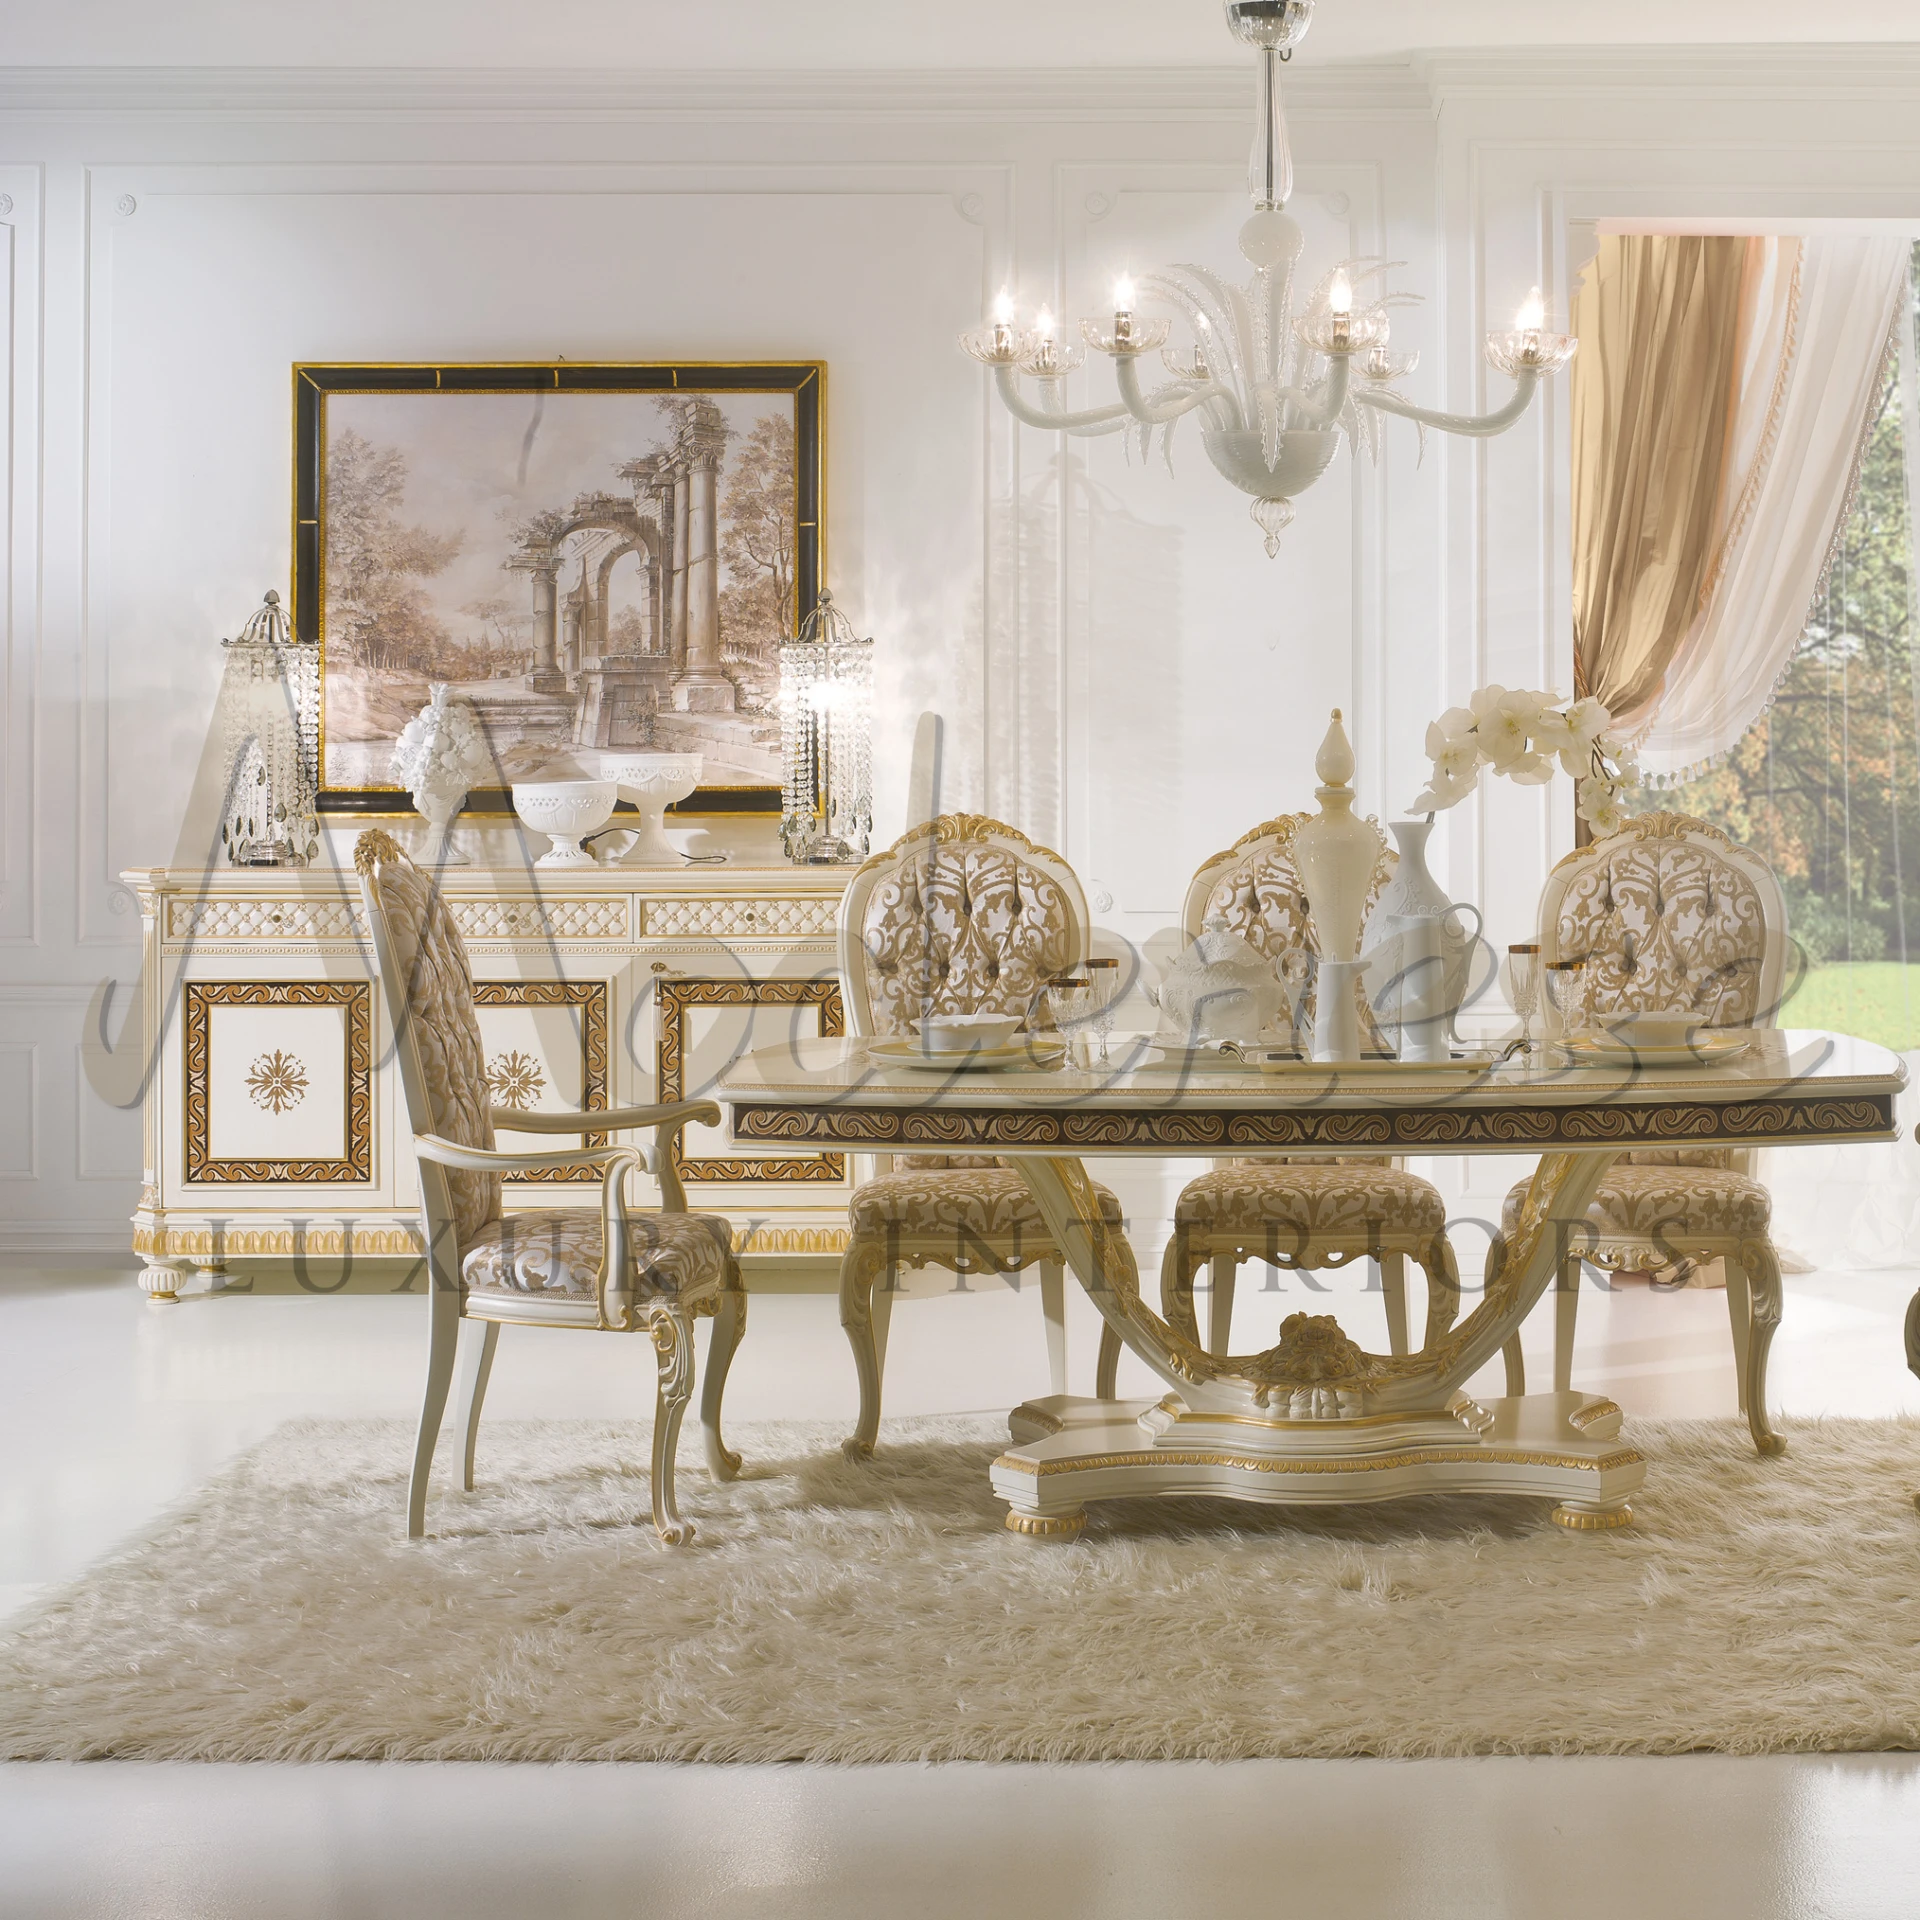 Luxury dining room with a glass table and golden design Italian upholstered chairs under a chandelier.